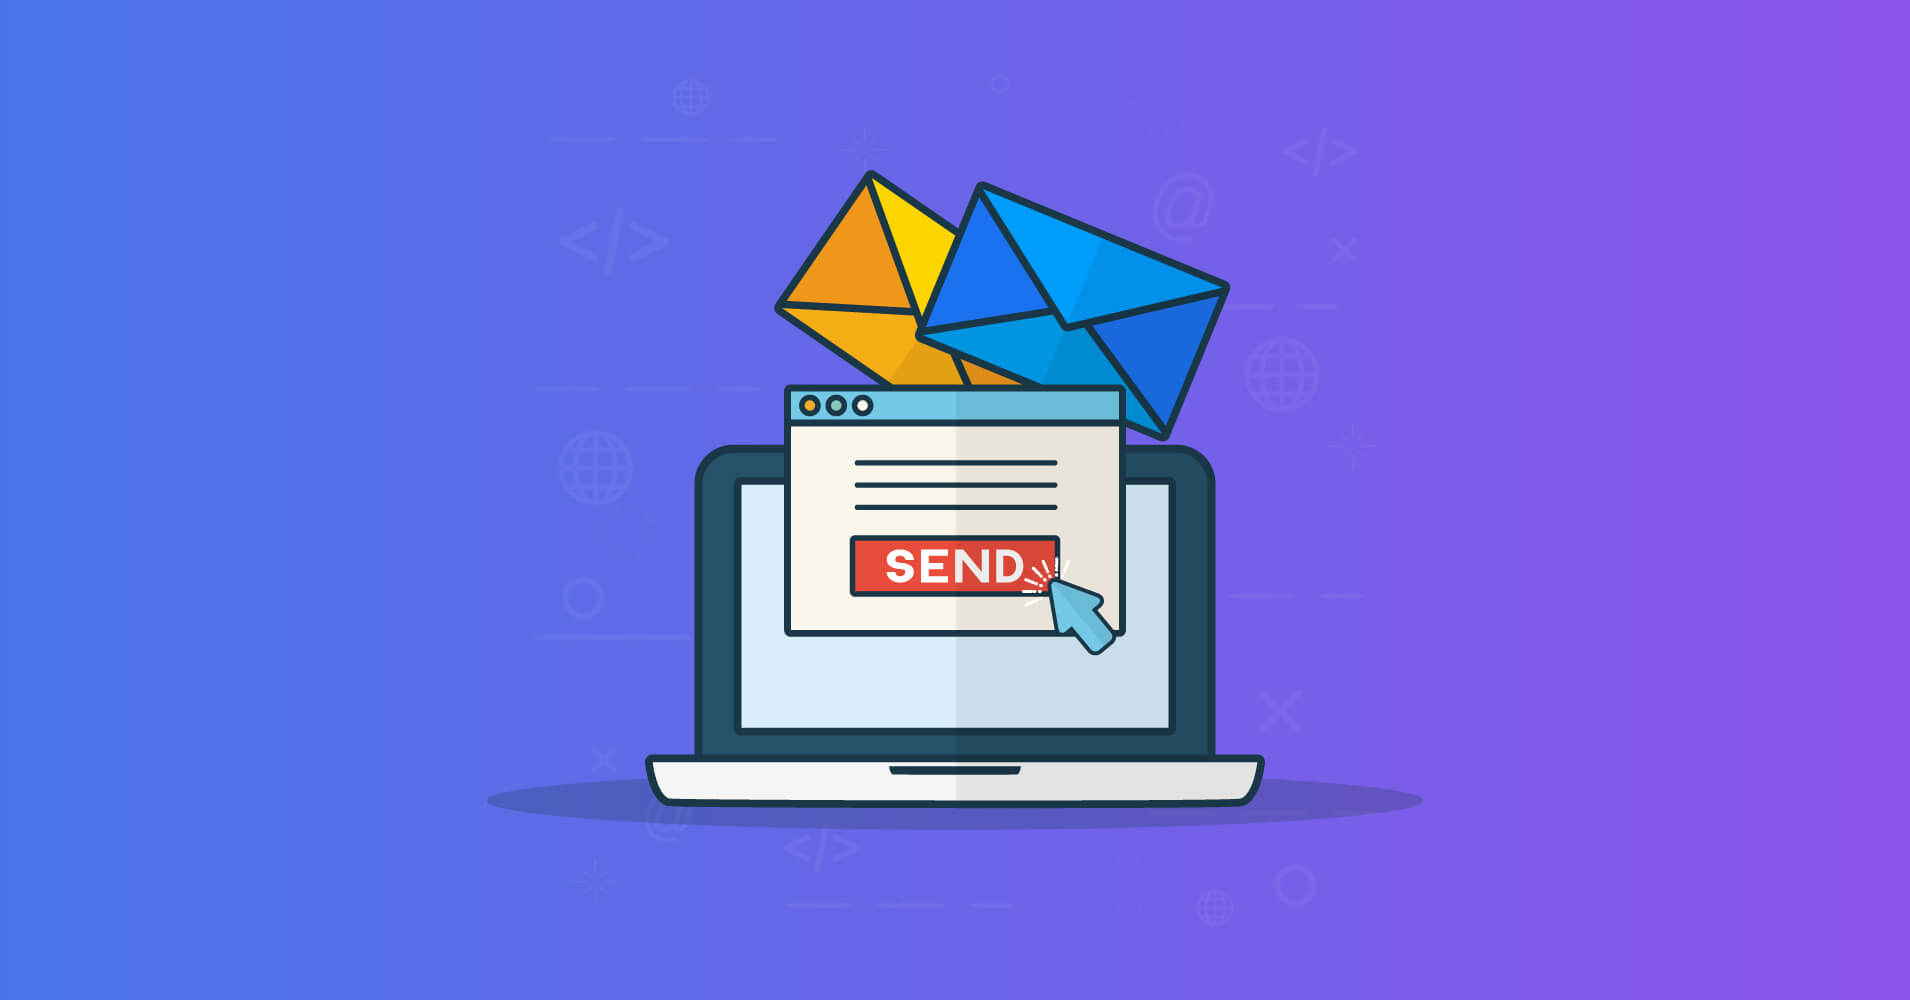 how to send bulk email without spamming